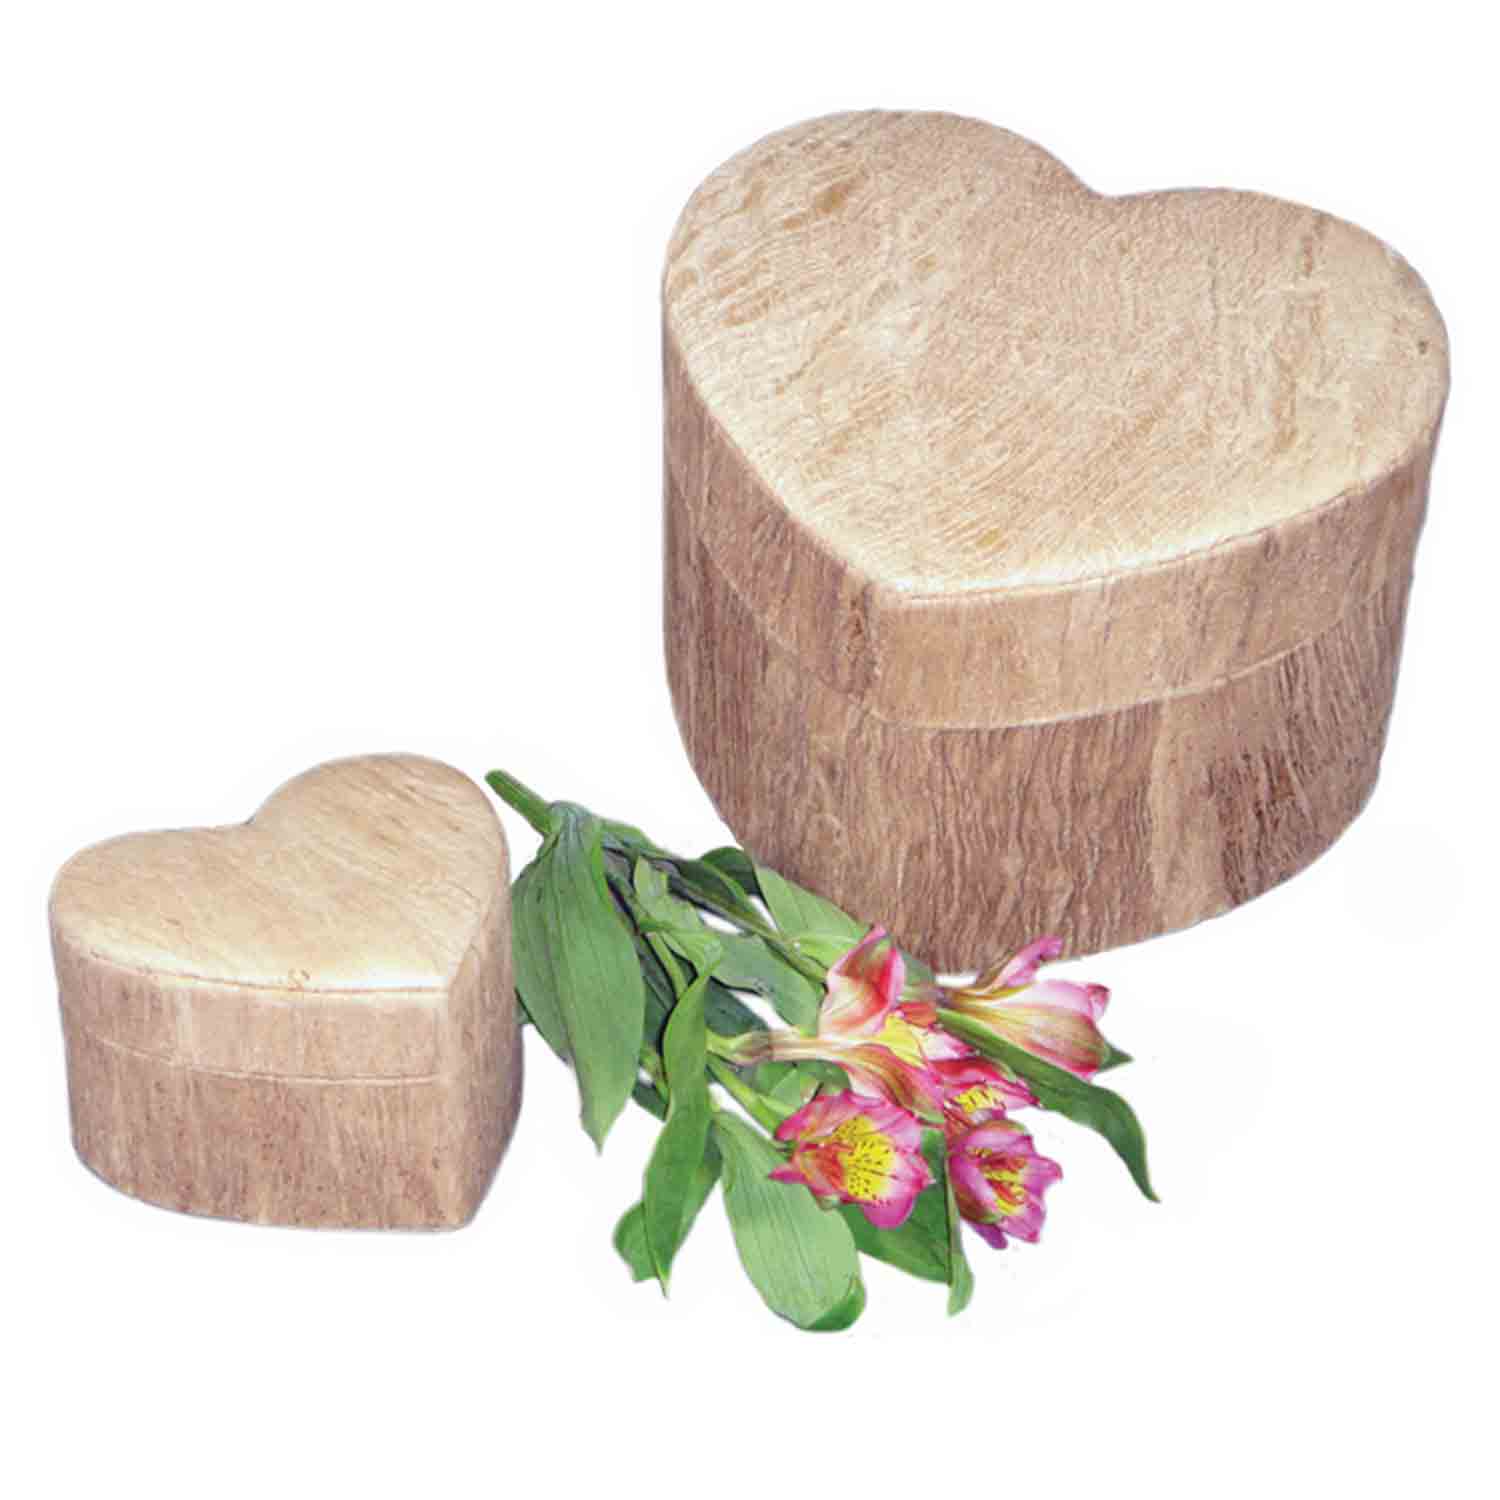 Heart Shaped Biodegradable Urn for Ashes in Wood Grain Small with Flowers Comparison